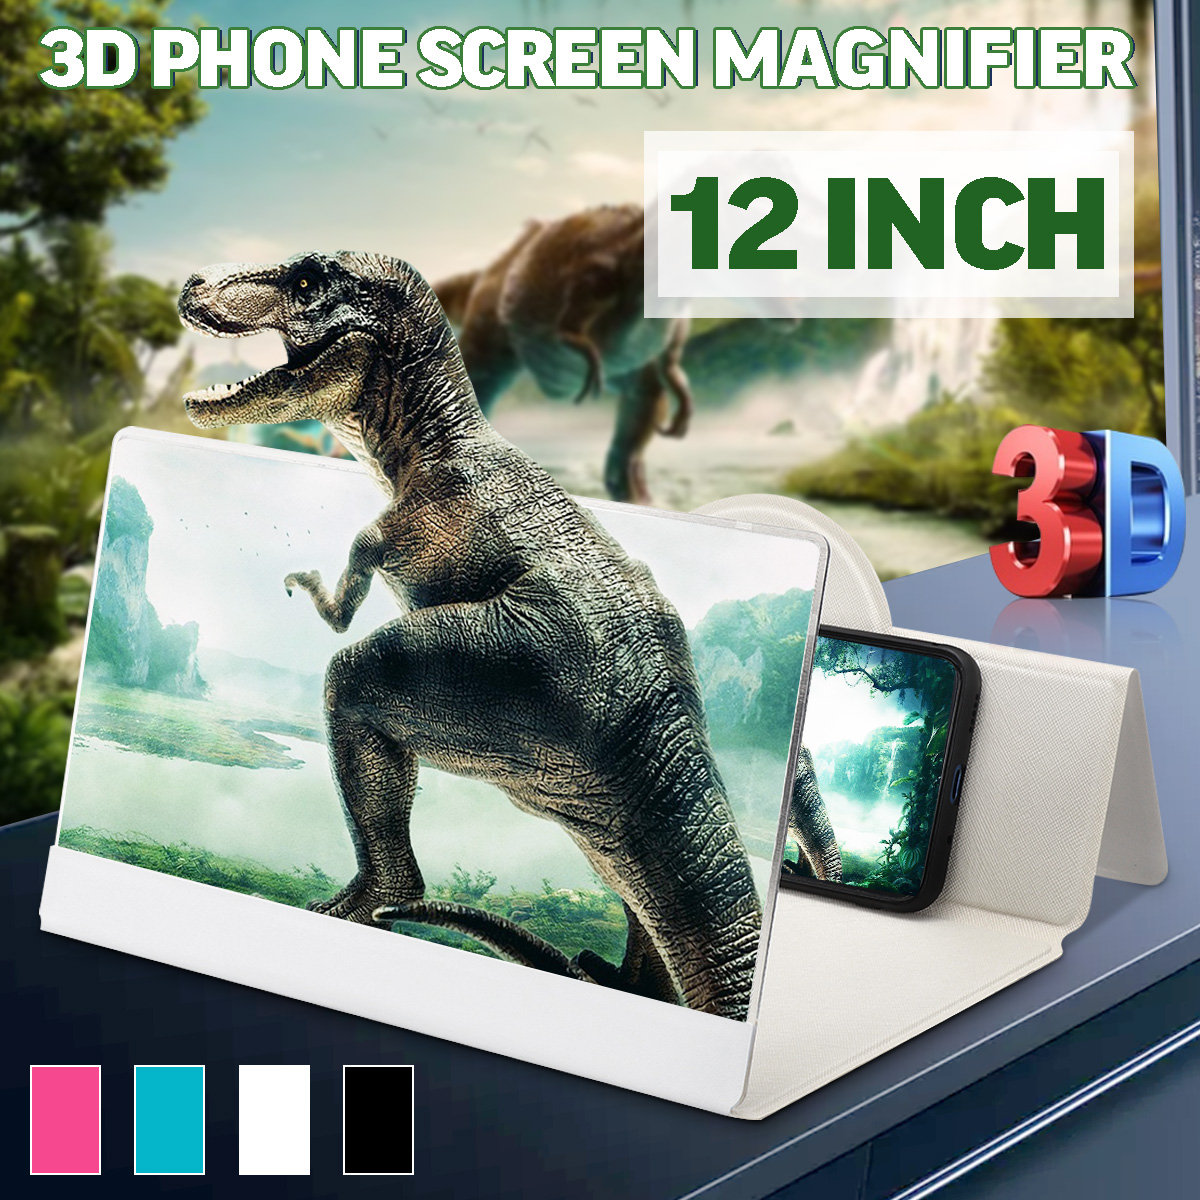 12 Inches Foldable 3D HD Phone Screen Magnifier Movie Video Amplifier PU Leather Cover For Smart Phones iPhone Samsung